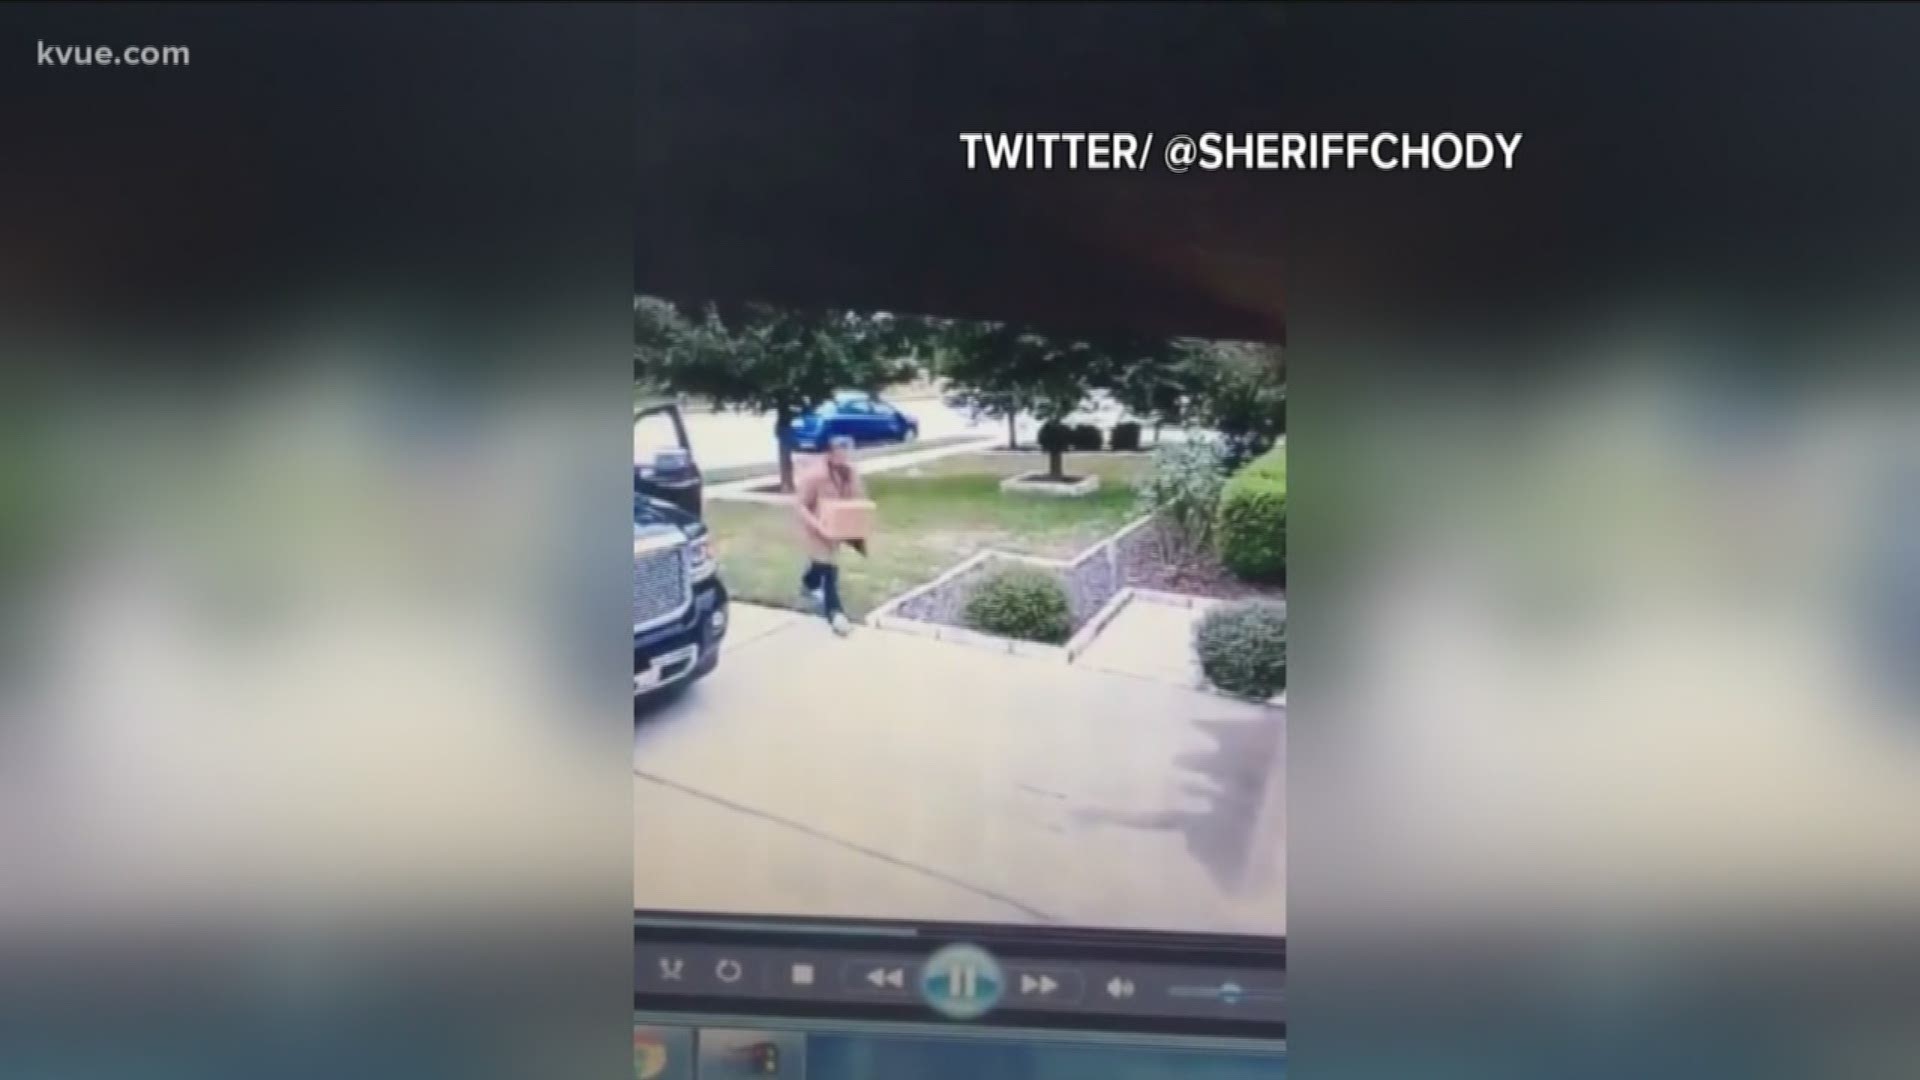 The Williamson County Sheriff's Office released a video on Twitter Tuesday which shows a man that is considered a suspect in a string of package thefts in the Teravista area.